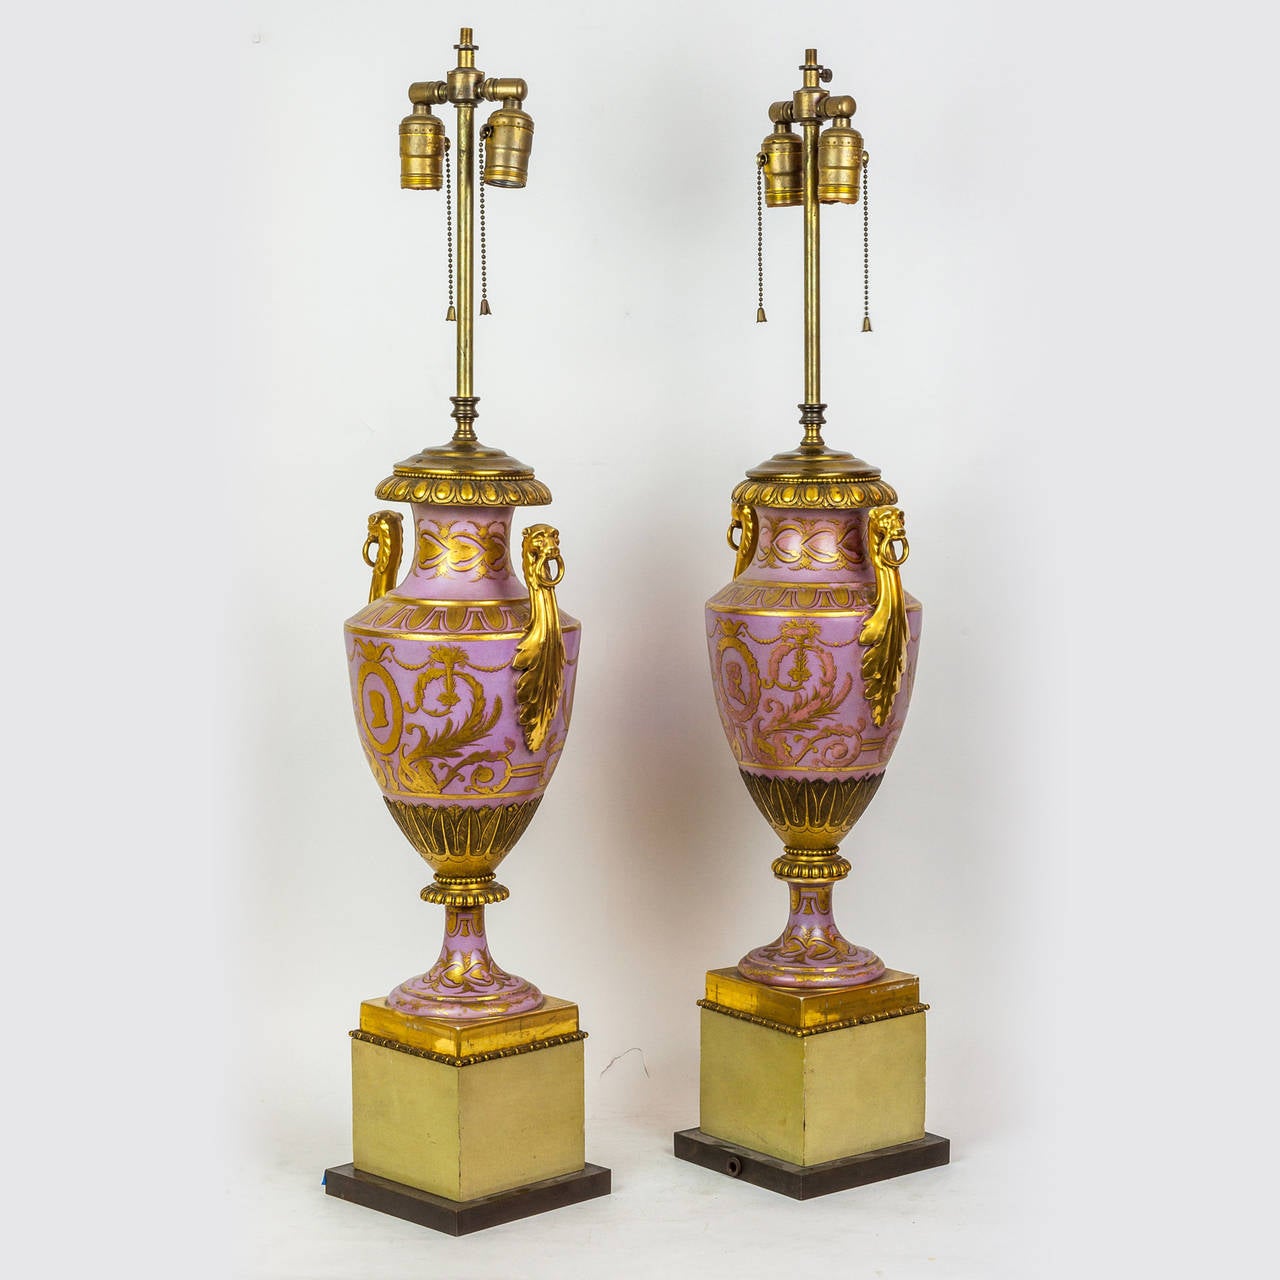 A fine pair of neoclassical gold painted porcelain lamps on wood base.
Stock number: LL22.